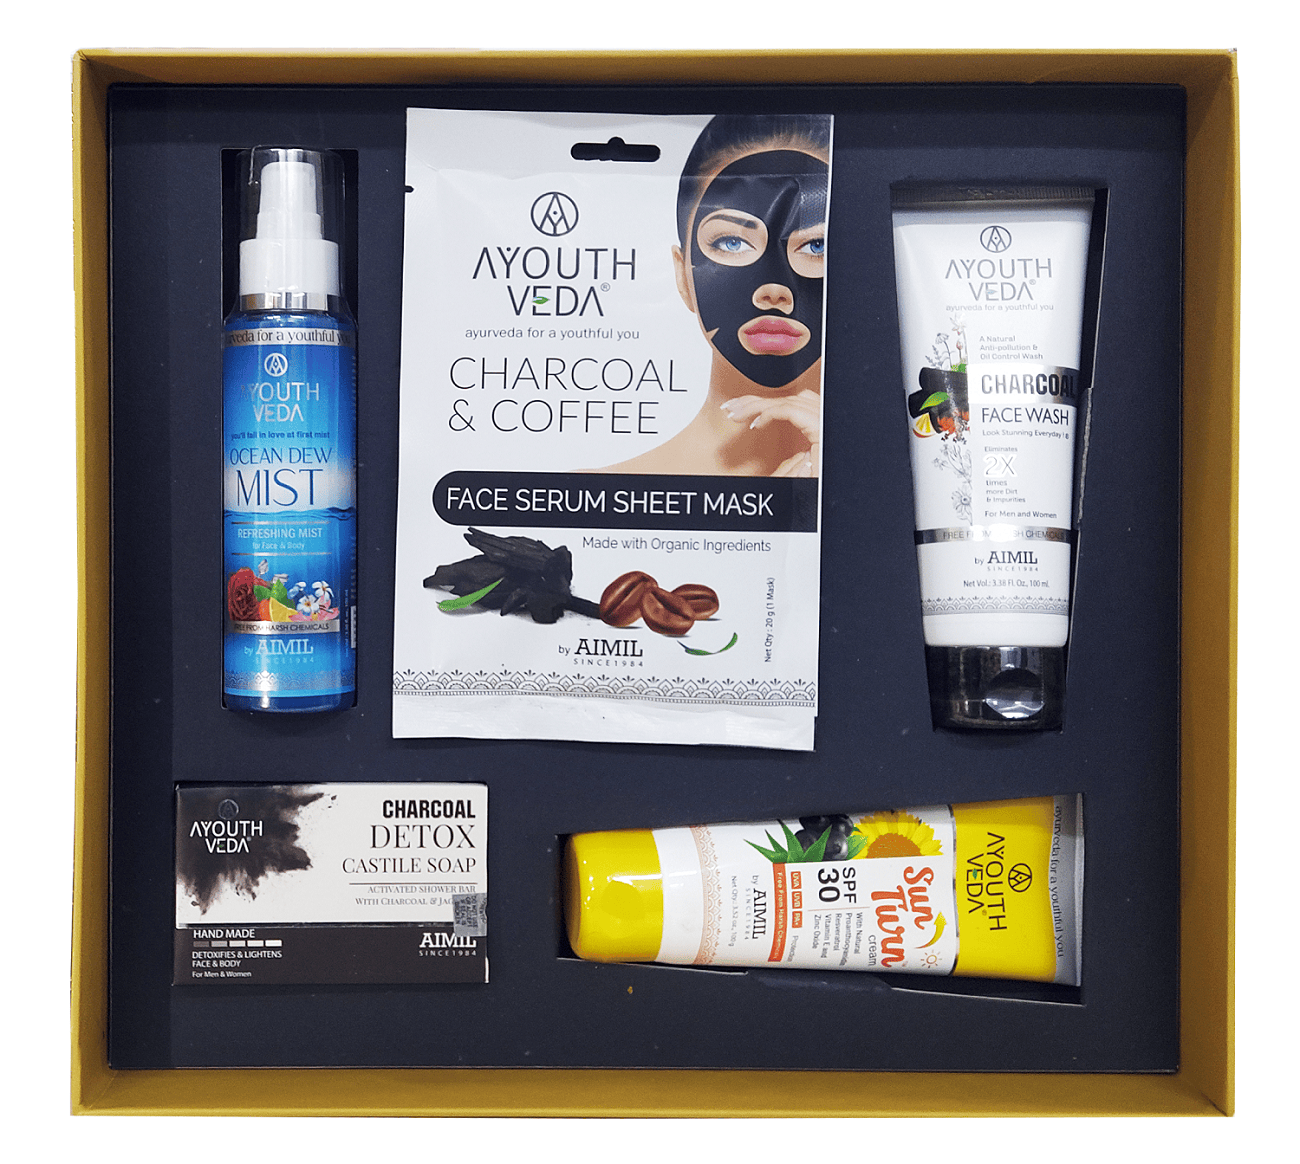 Archies Ayouth Charcoal Detox Skin Care Gift Set ( Charcoal face wash,Charcoal coffee face serum sheet mask,Charcoal detox castile soap,Ocean dew mist,Sun Turn Cream SPF 30 )